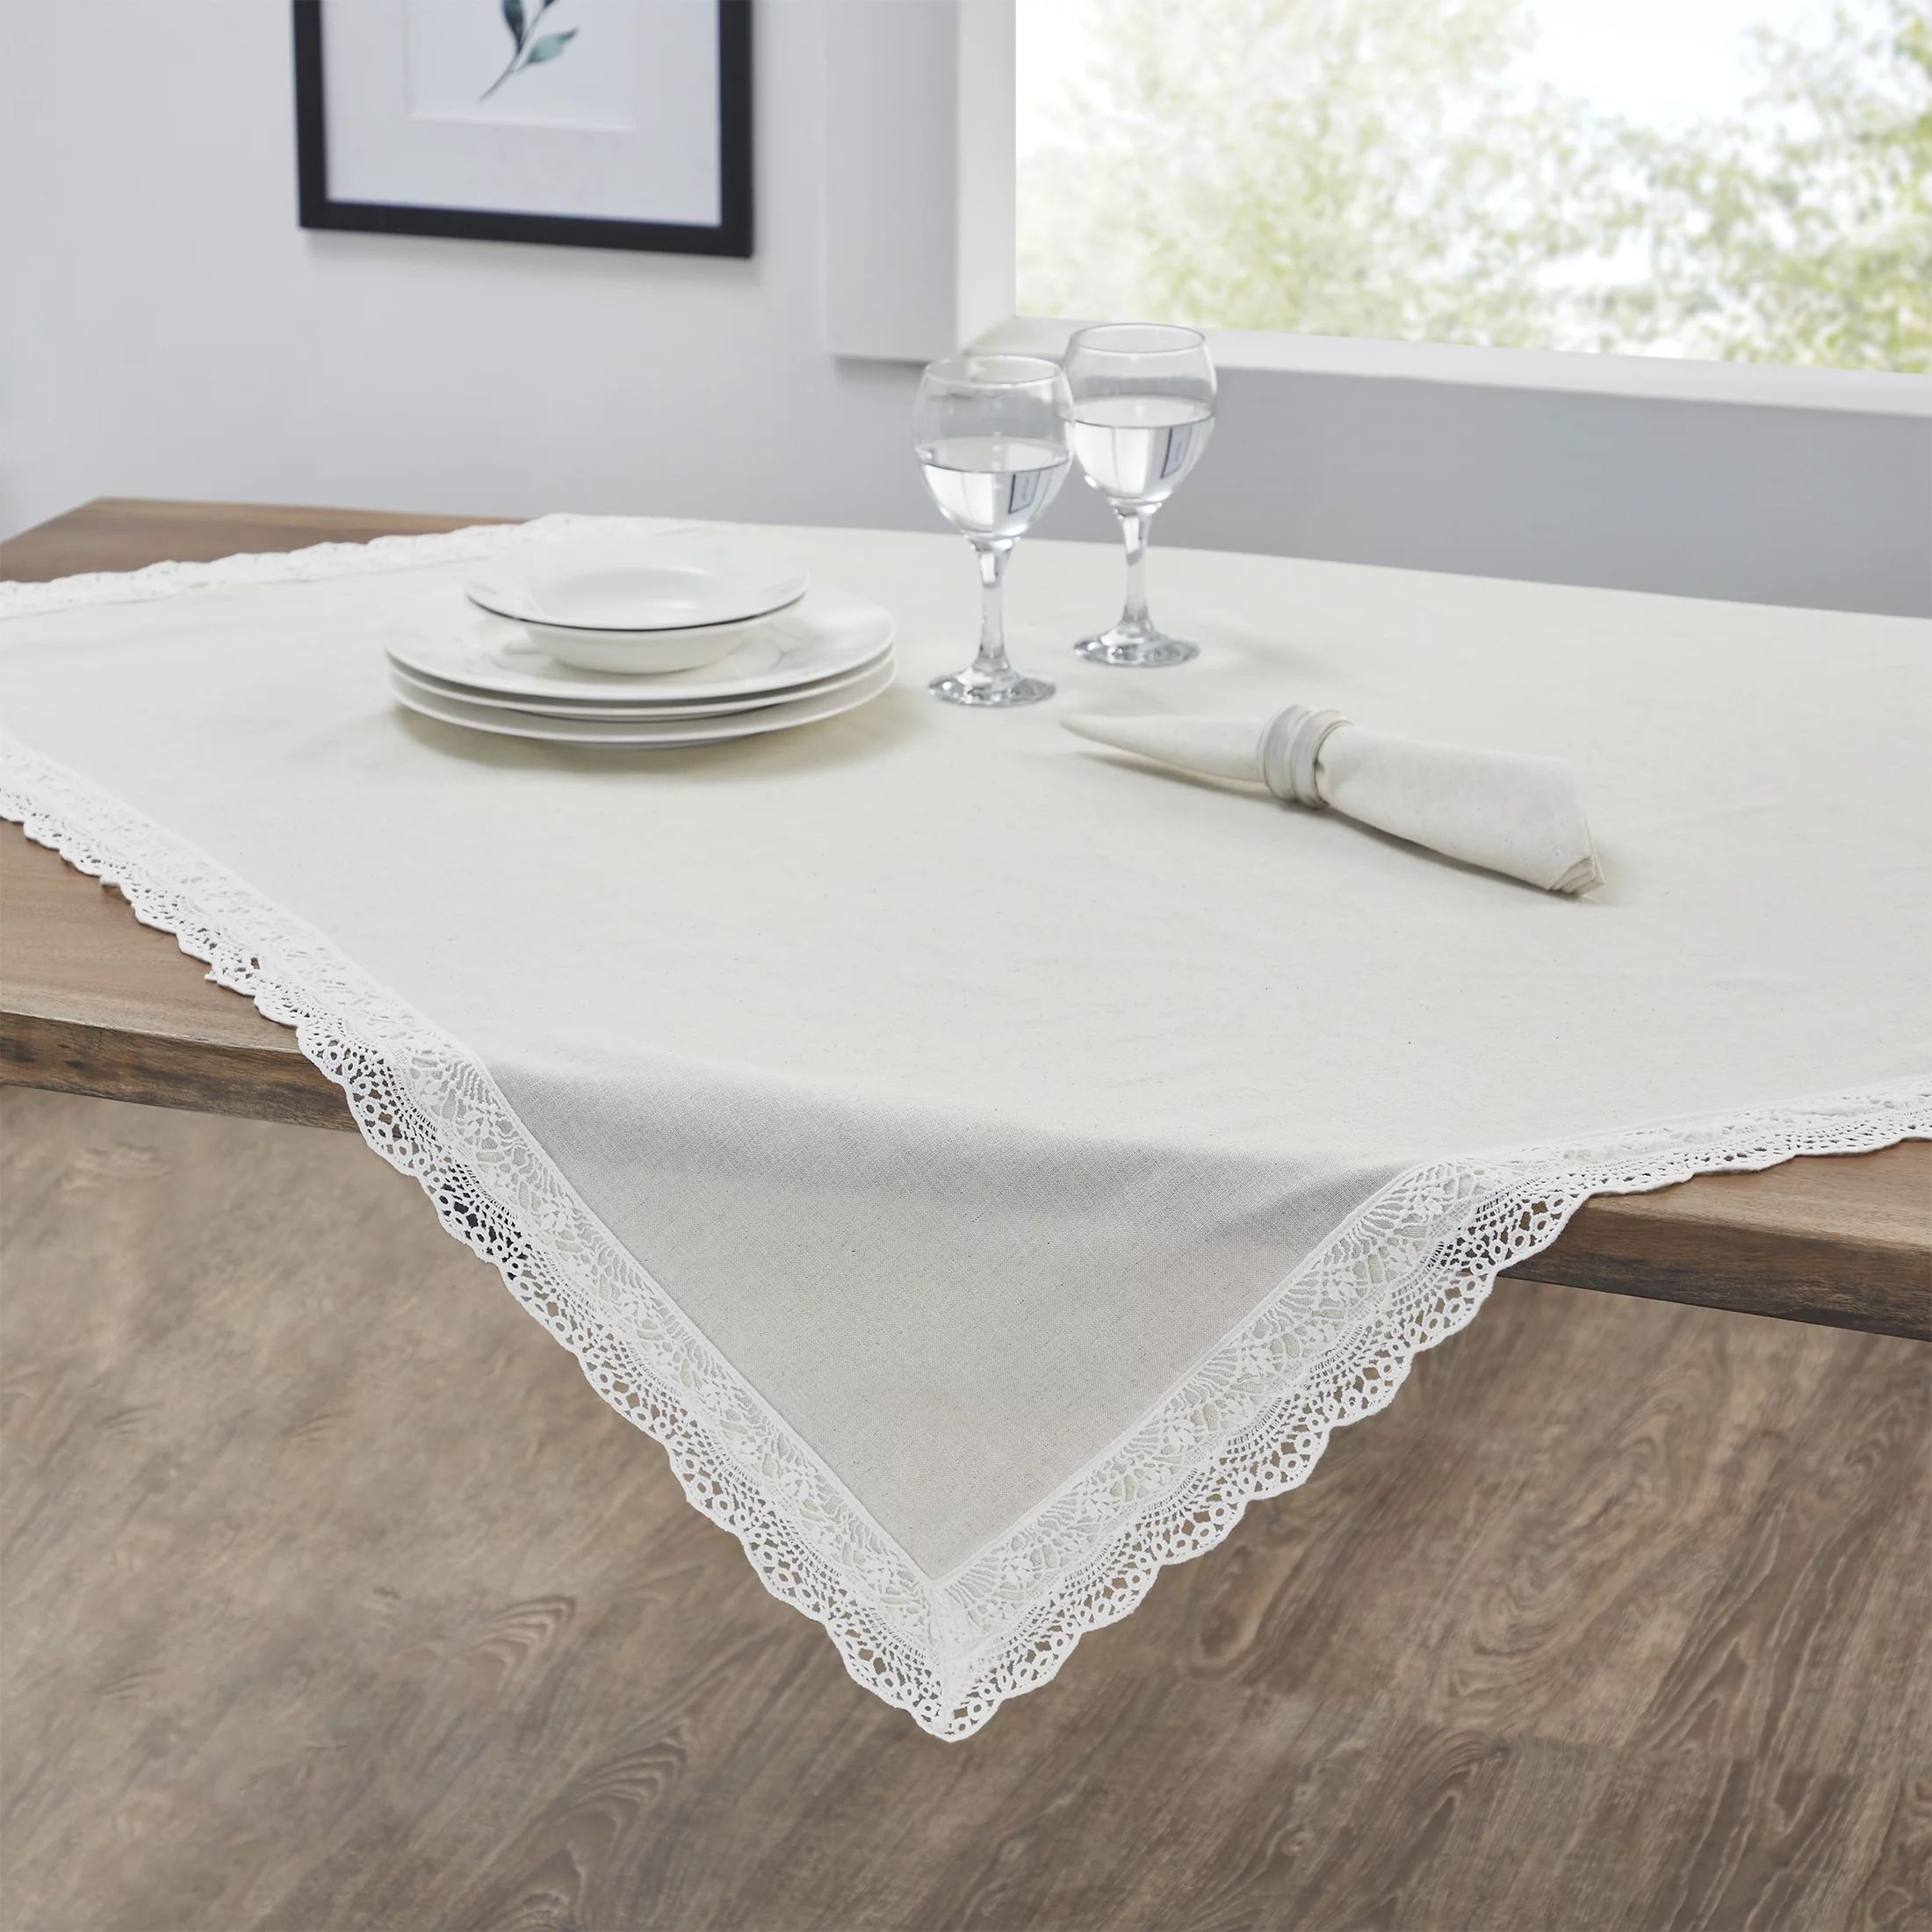 My Texas House Adalee Lace Trim Cotton/Linen 50" x 50" Square Tablecloth Throw, Beige, 1 Piece | Walmart (US)